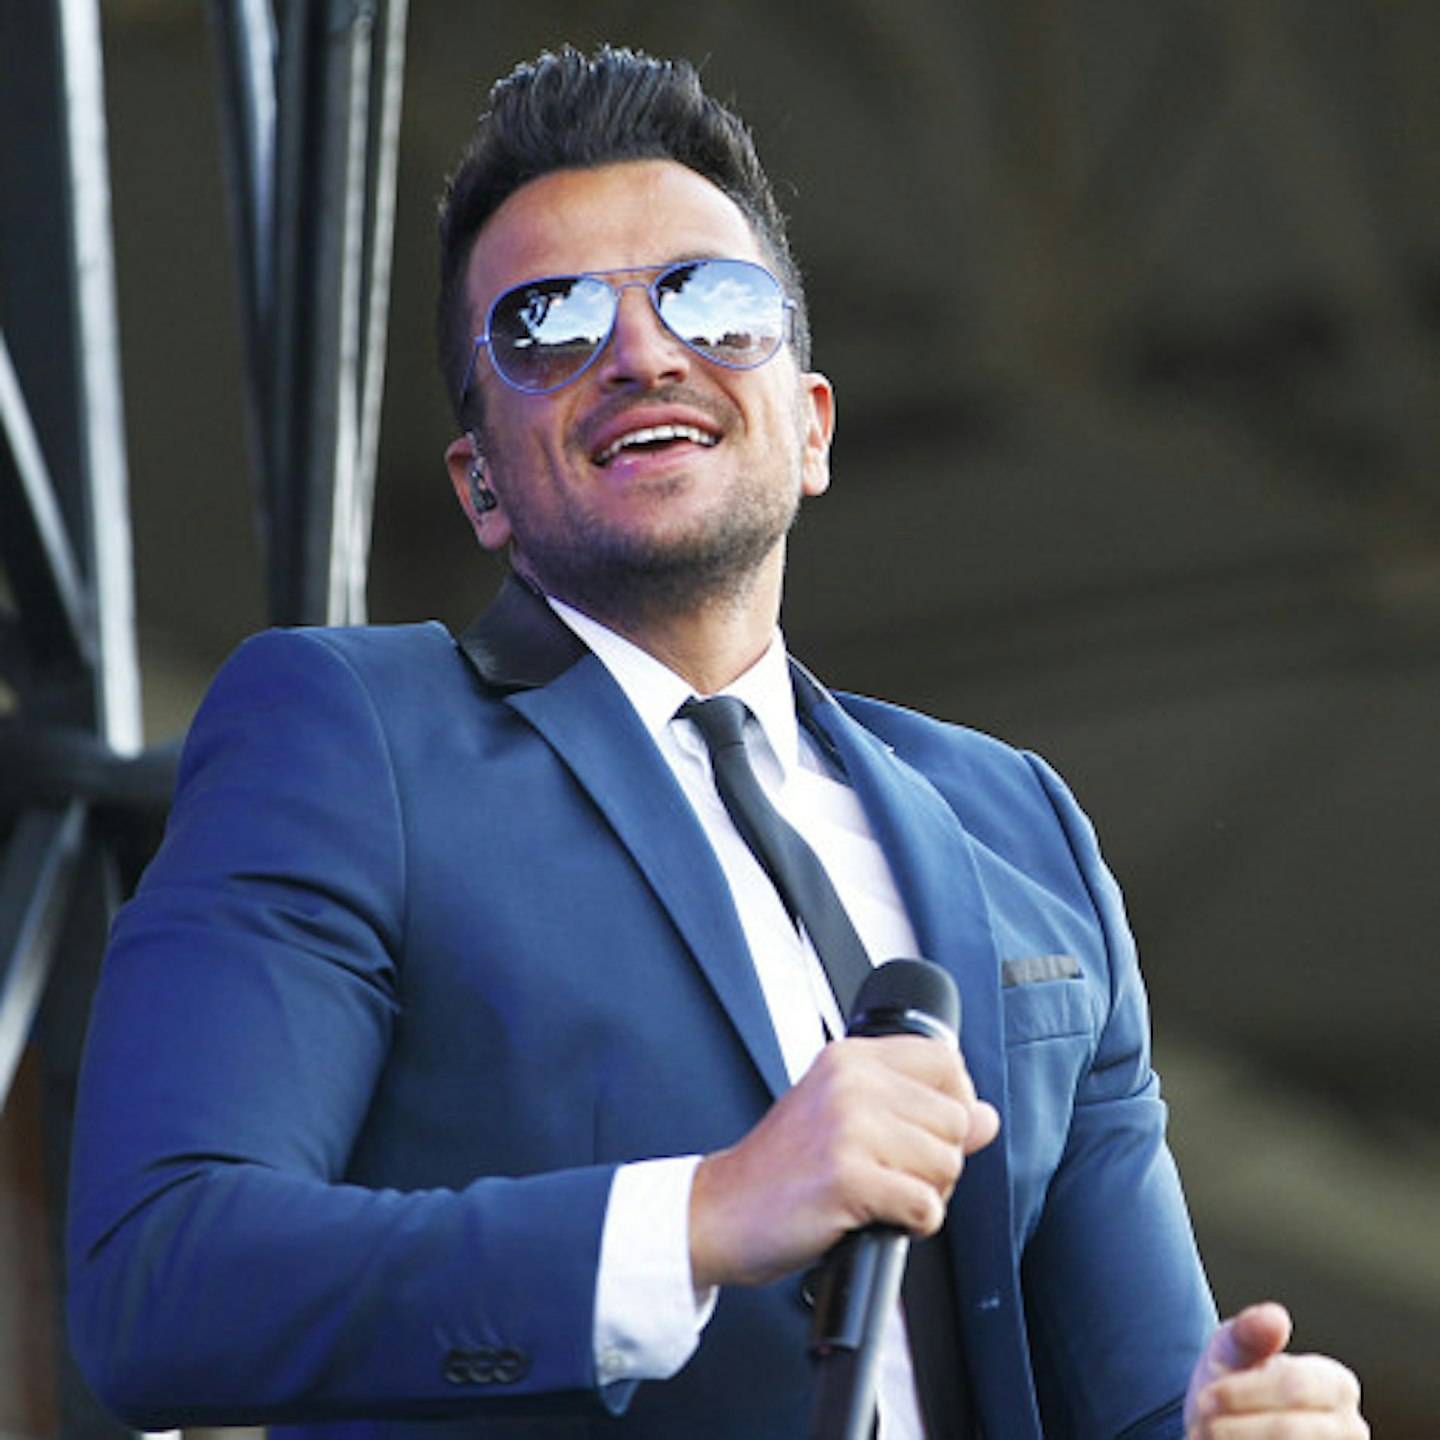 Peter Andre has been touring with new album Big Night